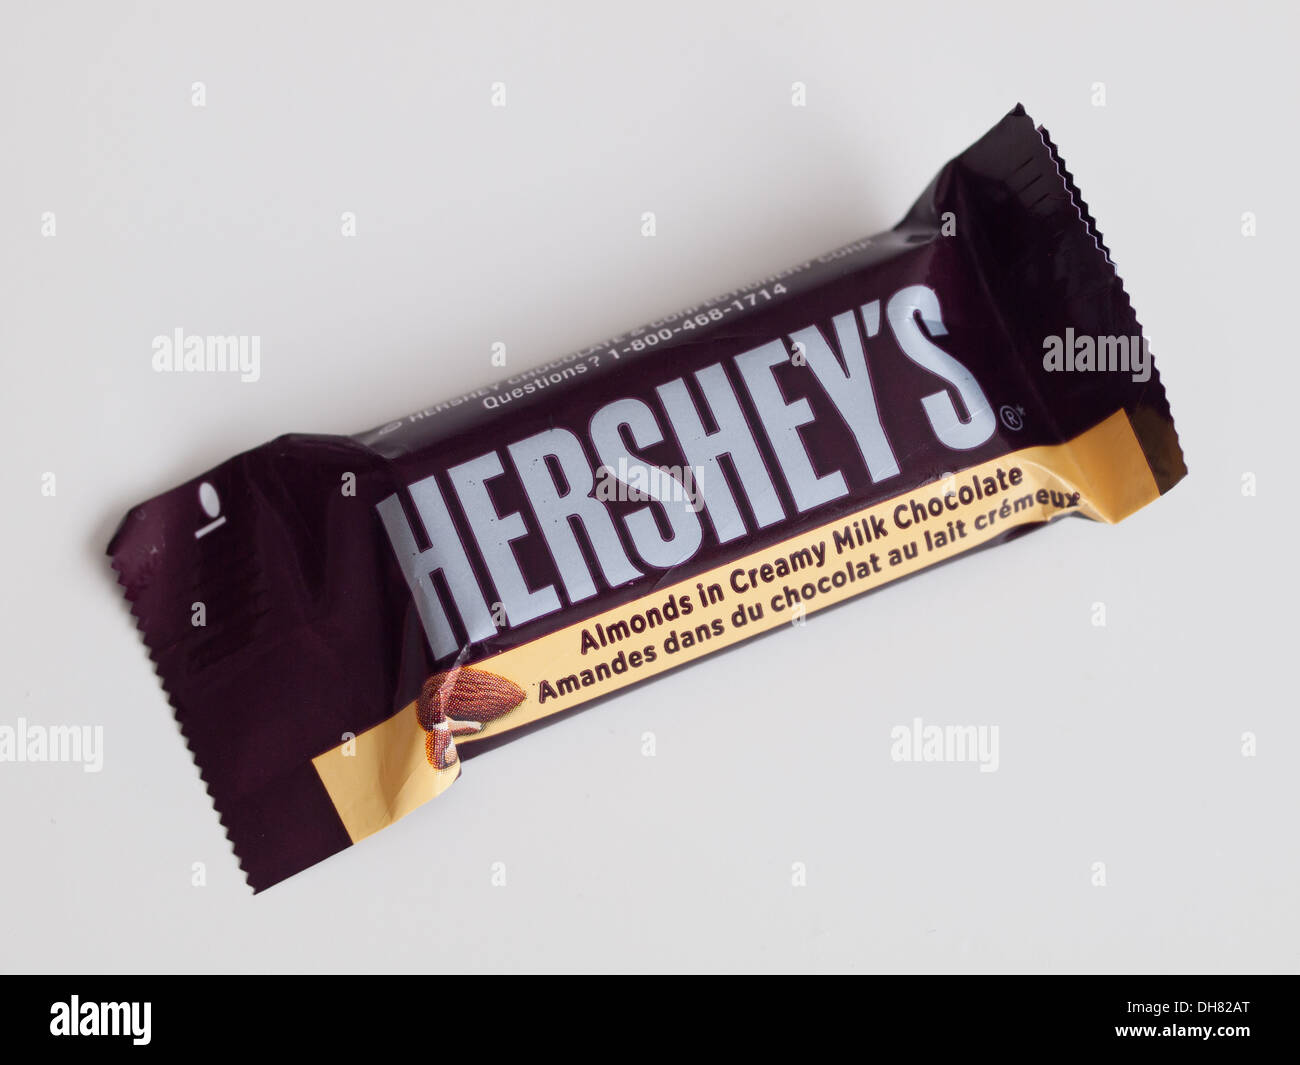 A Hershey's almond chocolate bar manufactured by The Hershey Company. Canadian Halloween 'fun size' packaging shown. Stock Photo